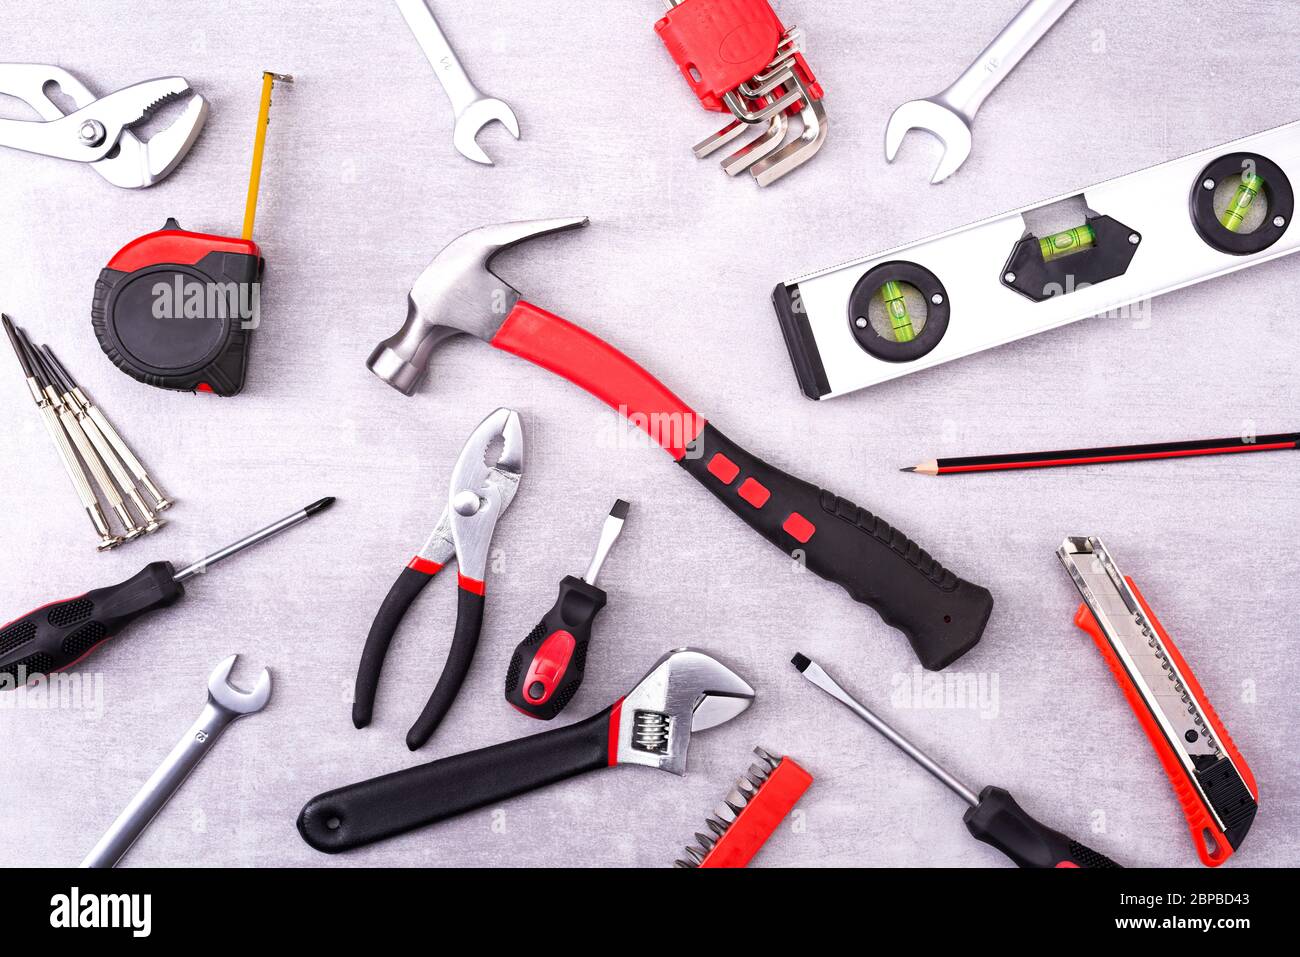 Technician Small Tools For Operation Fixing Equipment Stock Photo -  Download Image Now - iStock